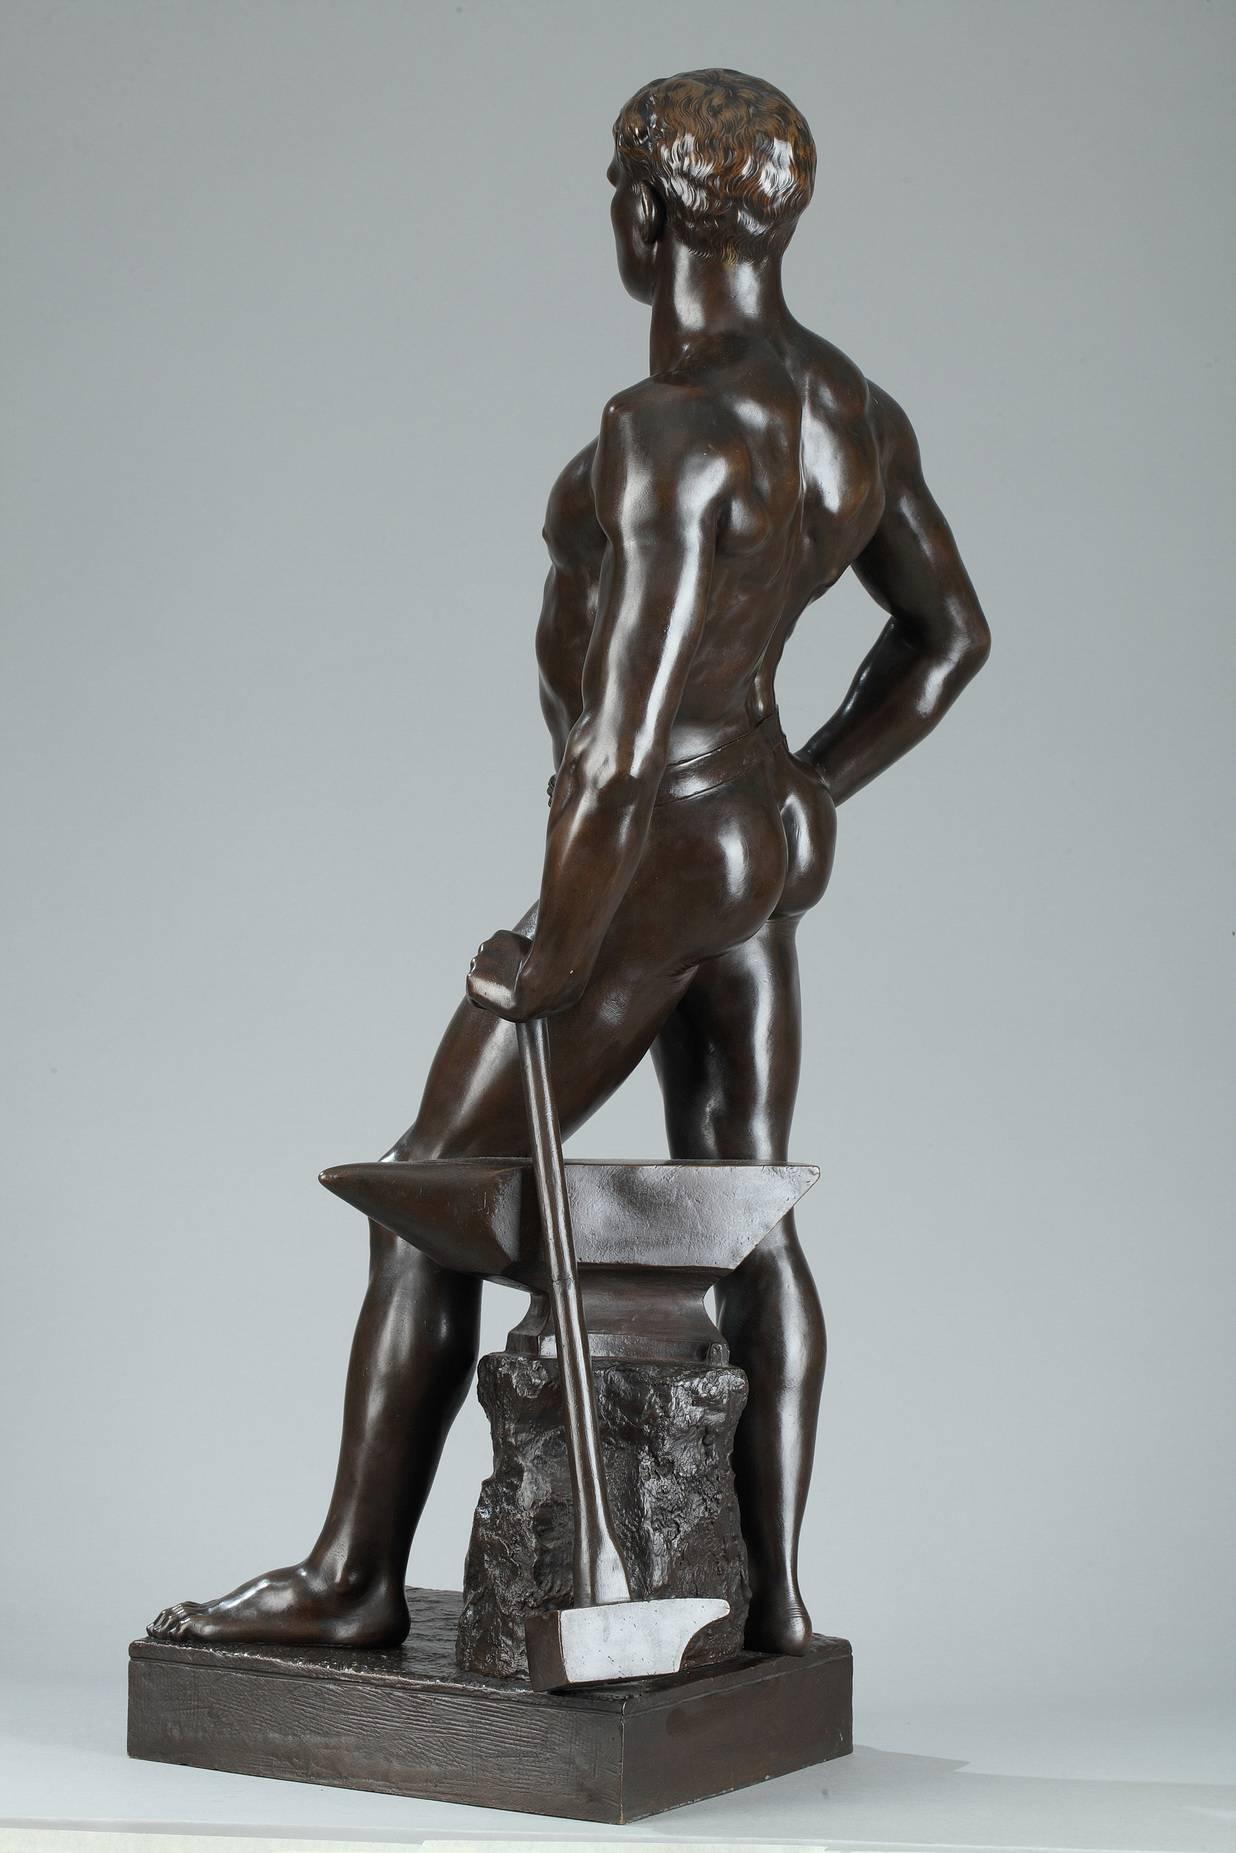 Bronze sculpture with brown patina featuring a blacksmith standing while leaning against his anvil and hammer. He is presented nude, standing in contrapposto, his left leg forward and slightly bent and set on a square base. The title sculpted on the